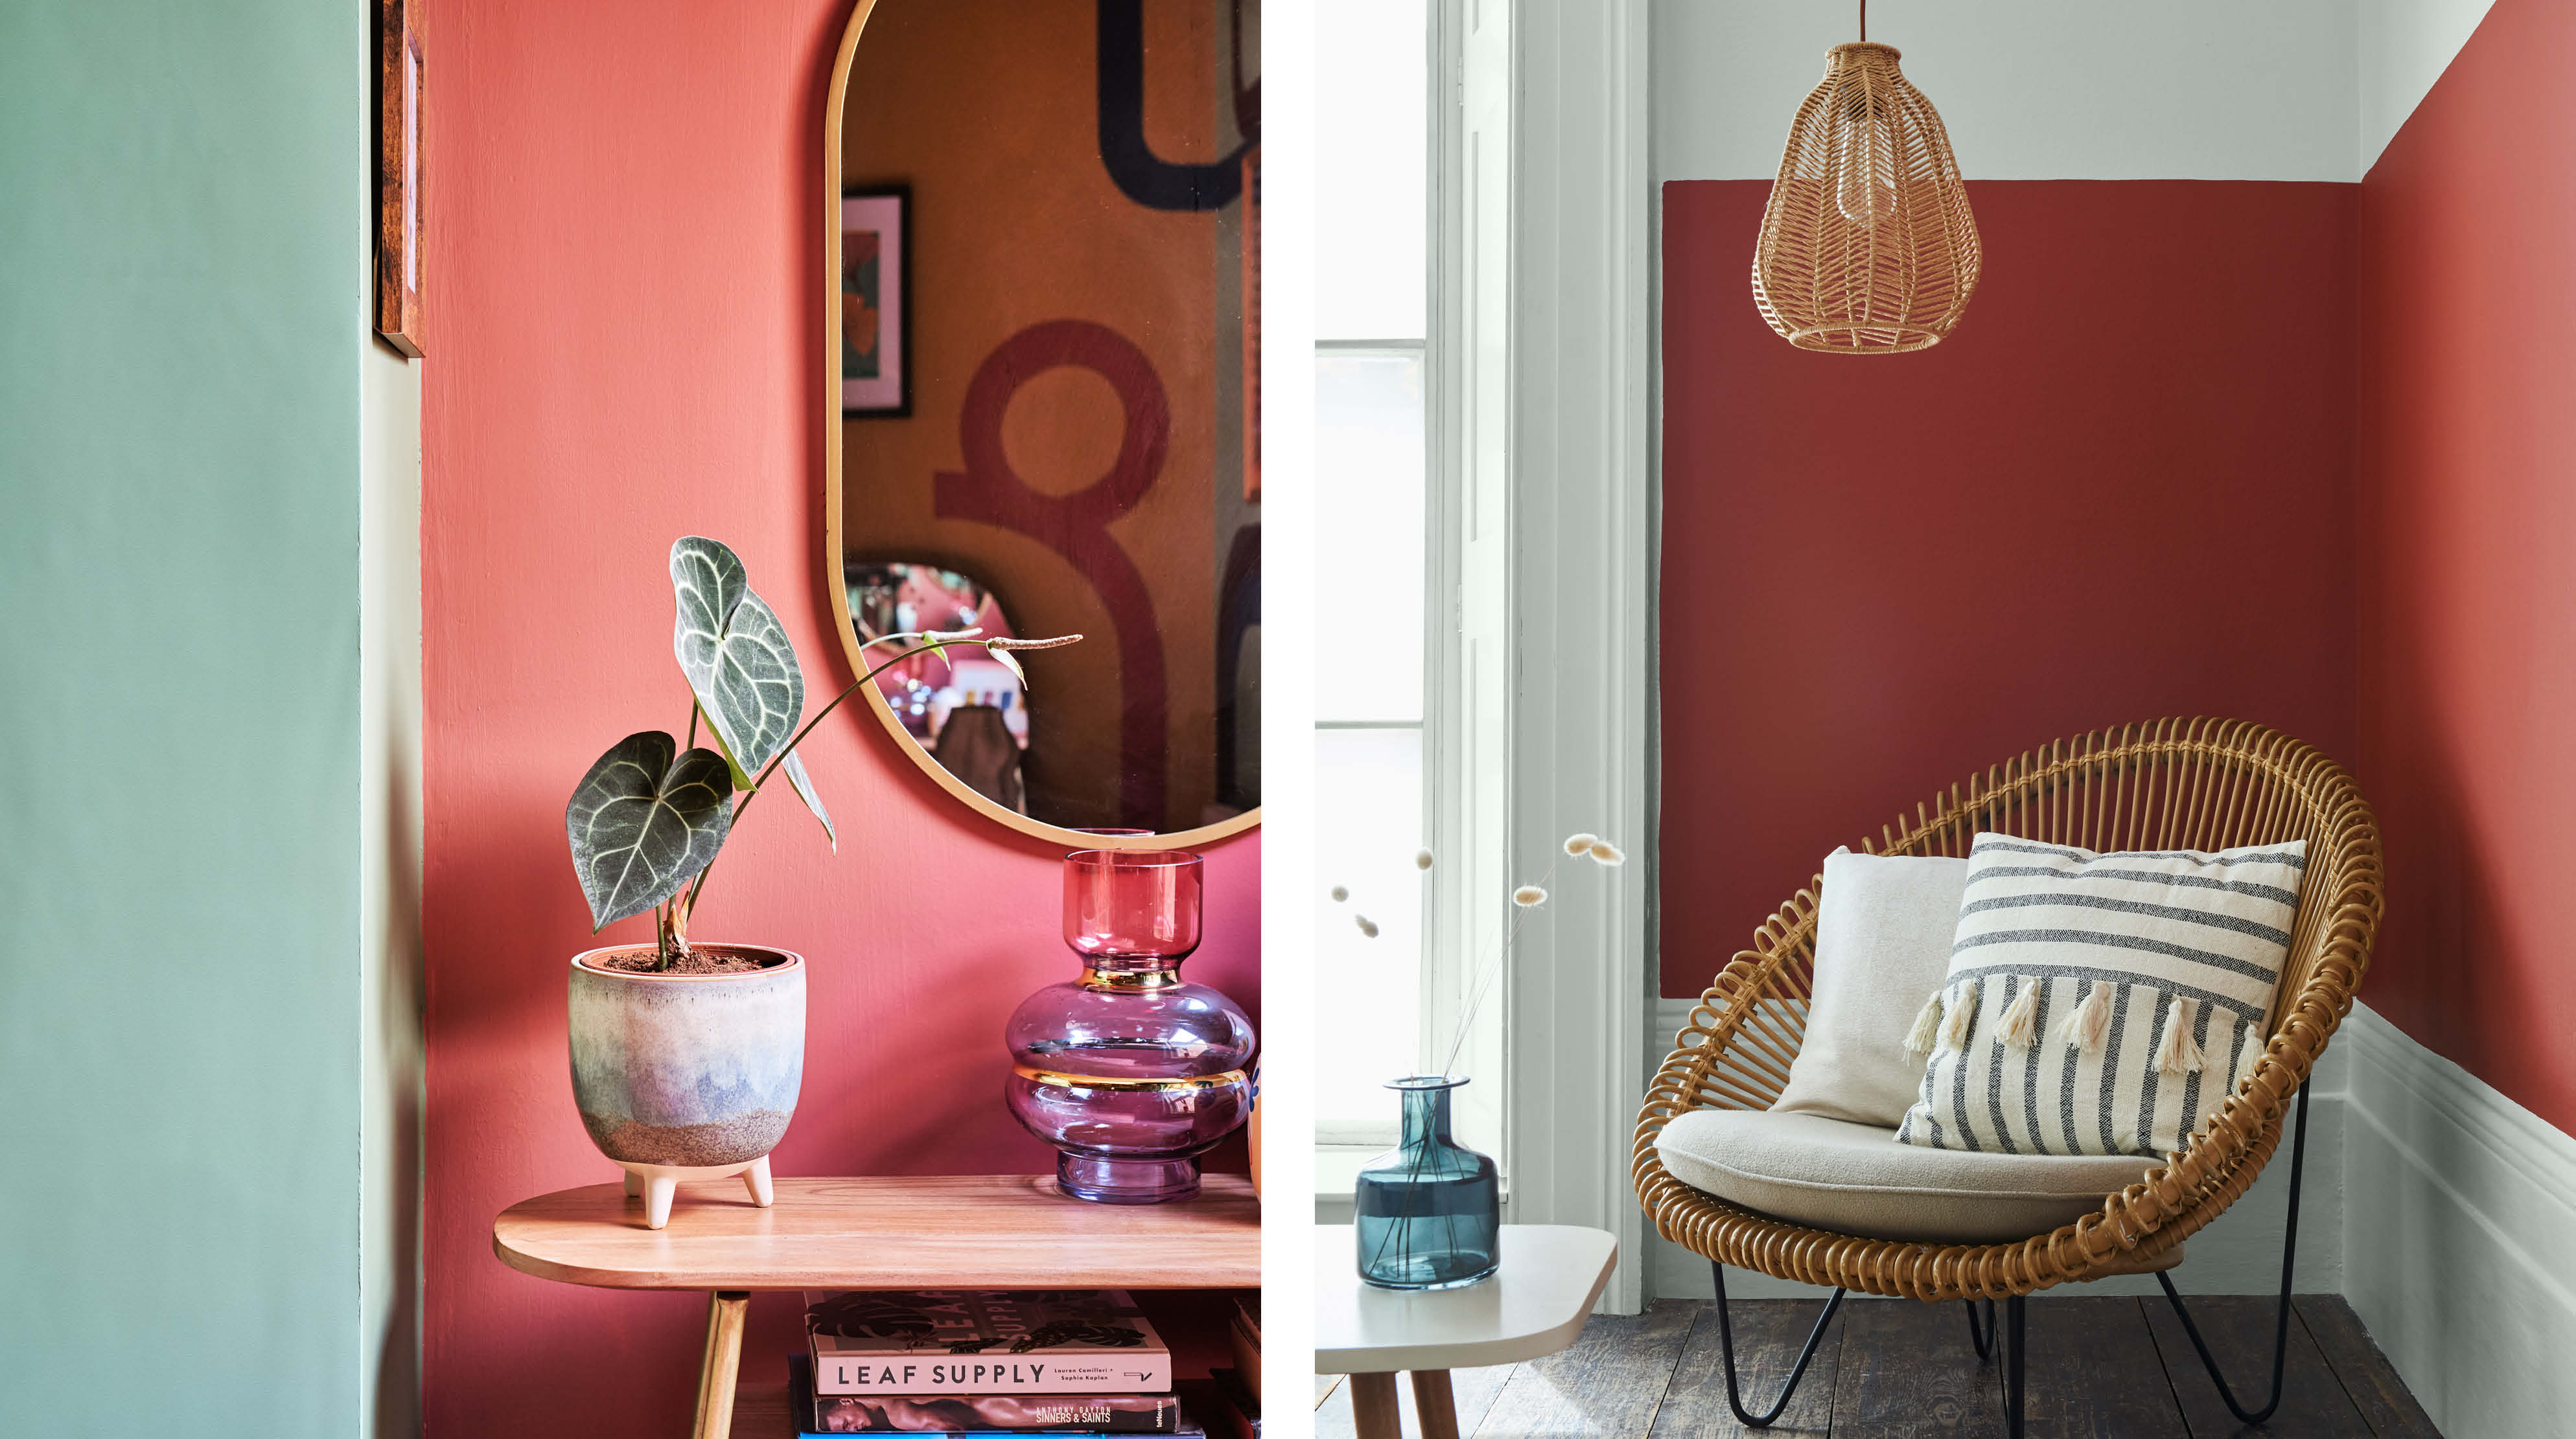 In the first image, there is a wall painted in red-brown Salmon and light green Wanderlust.  In the second image a large rattan chair sits in front of a Fire Brick red wall and Library Grey skirting boards.